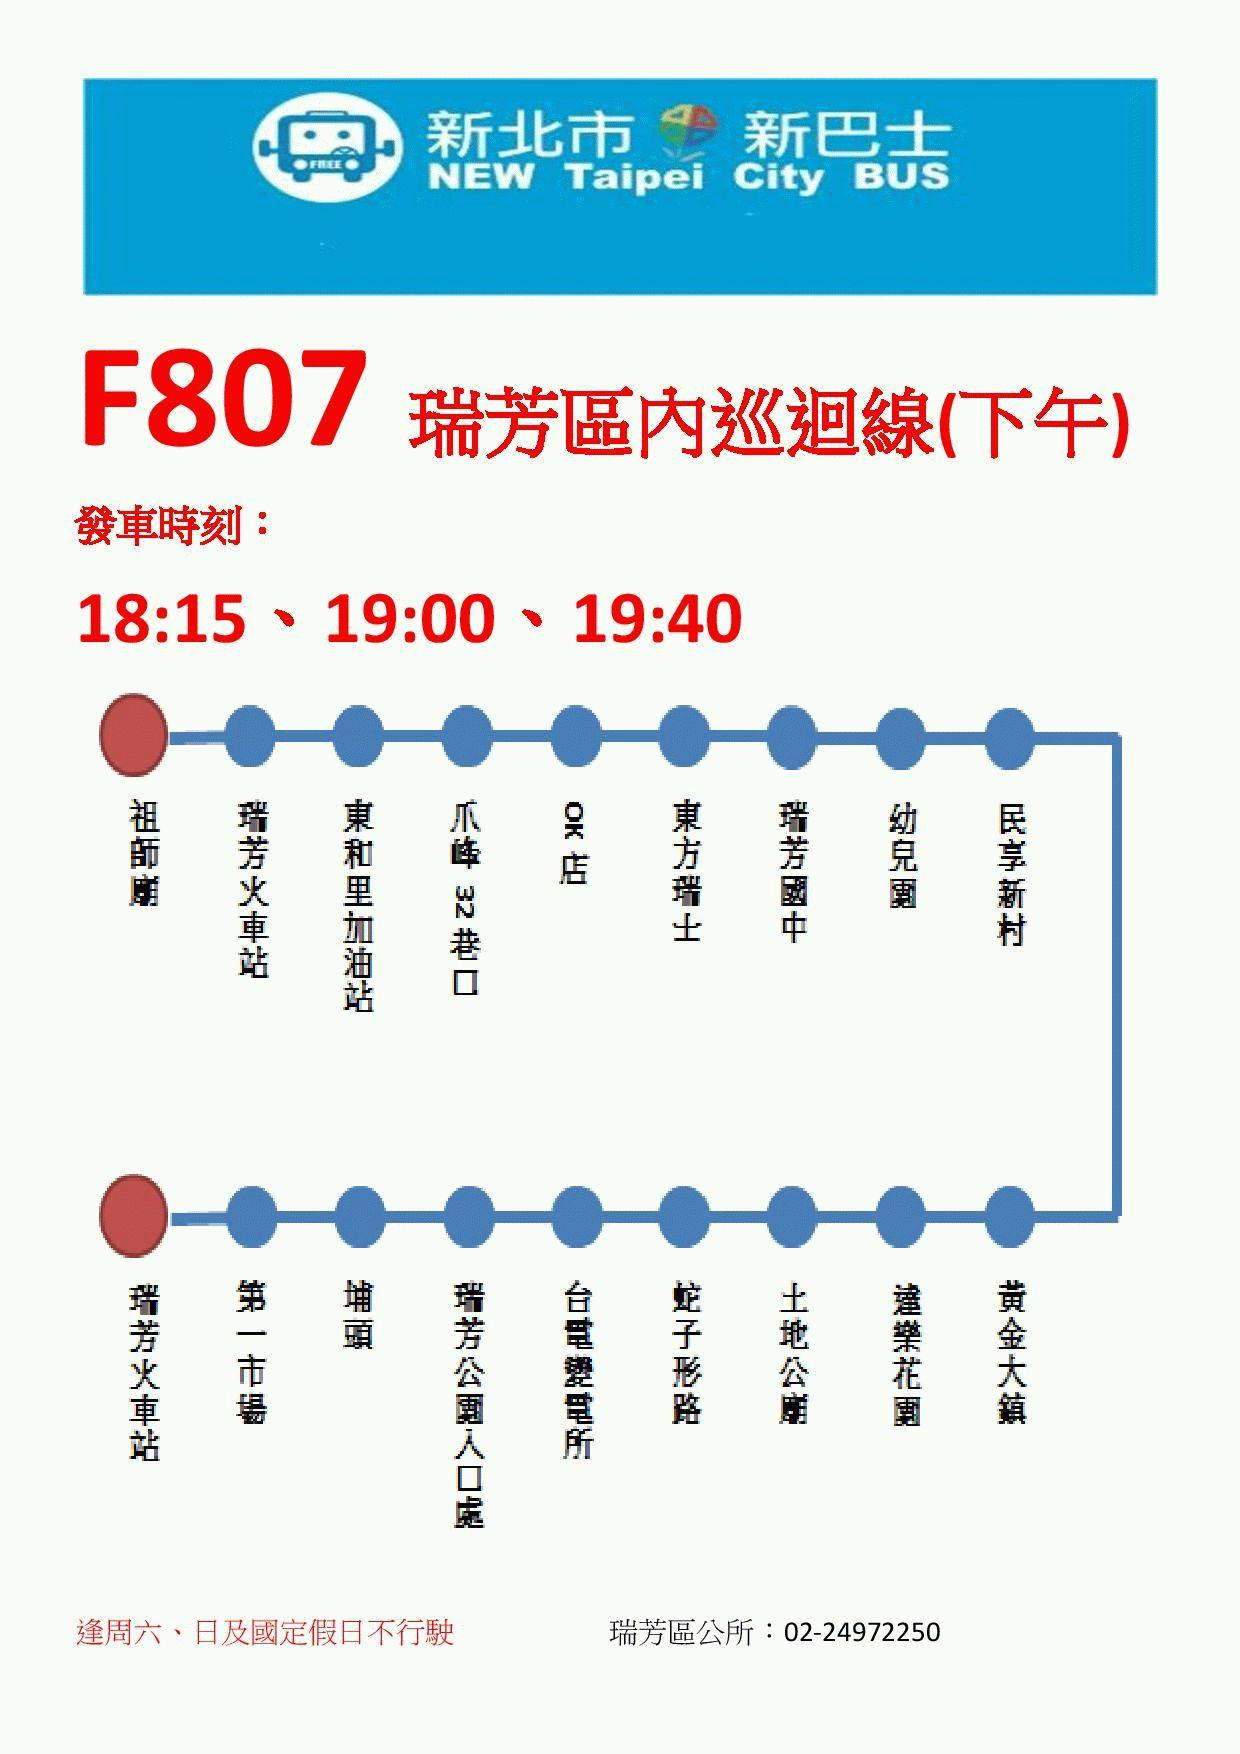 F807Route Map-新北市 Bus